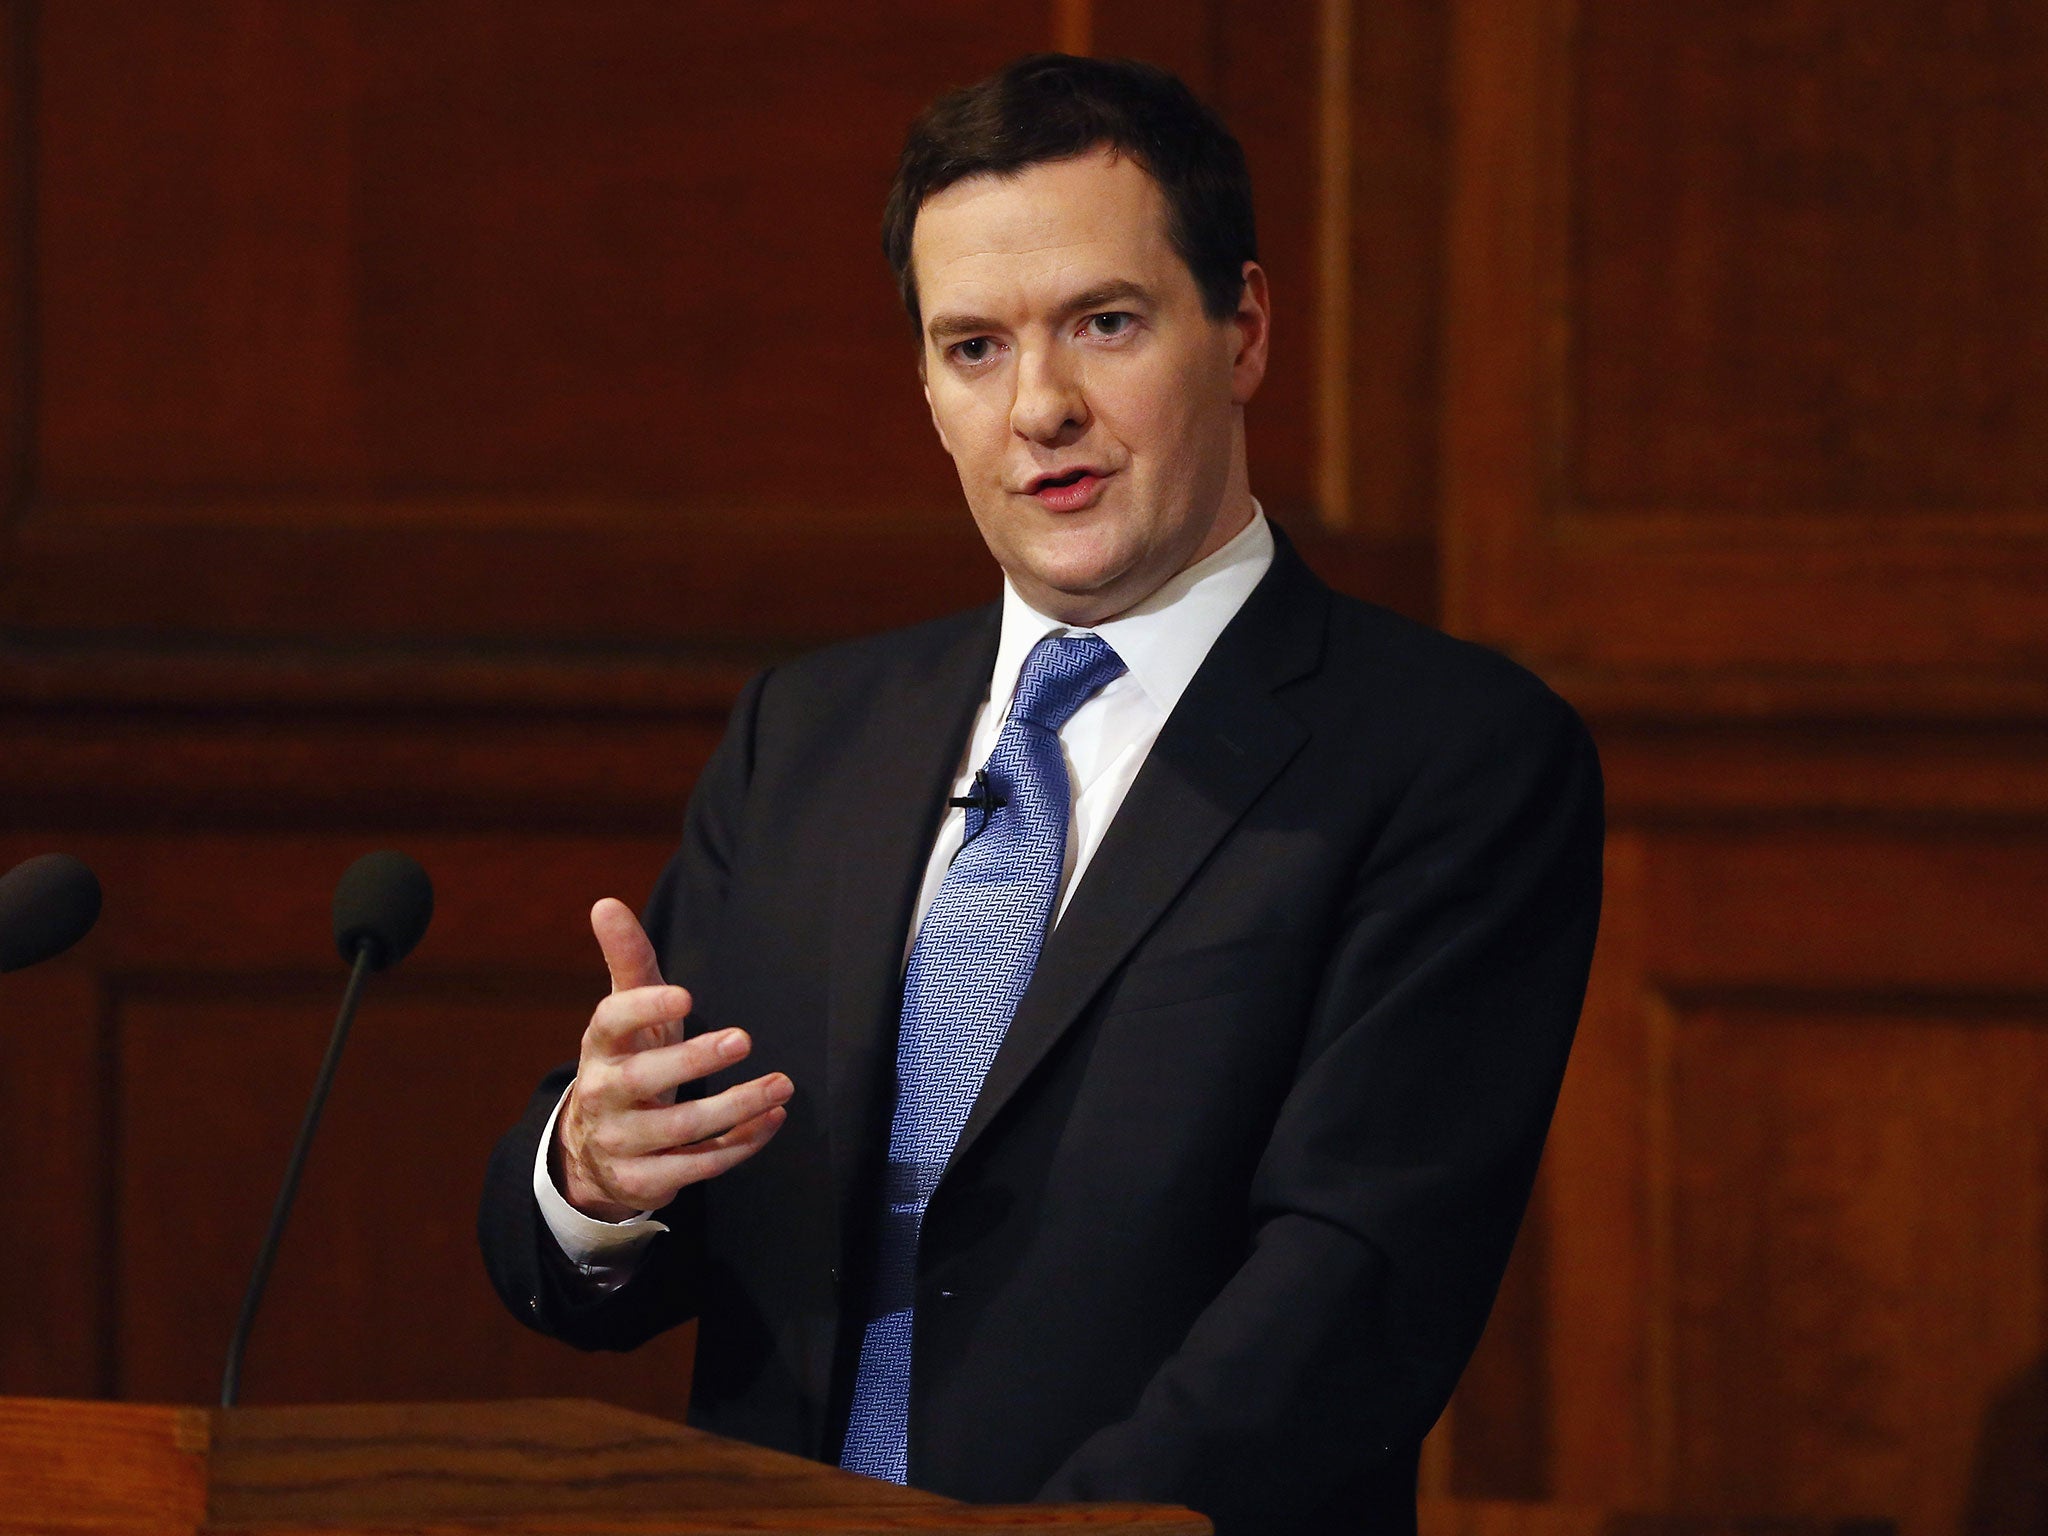 Chancellor George Osborne said the only way to improve living standards was to continue with the Government’s economic strategy